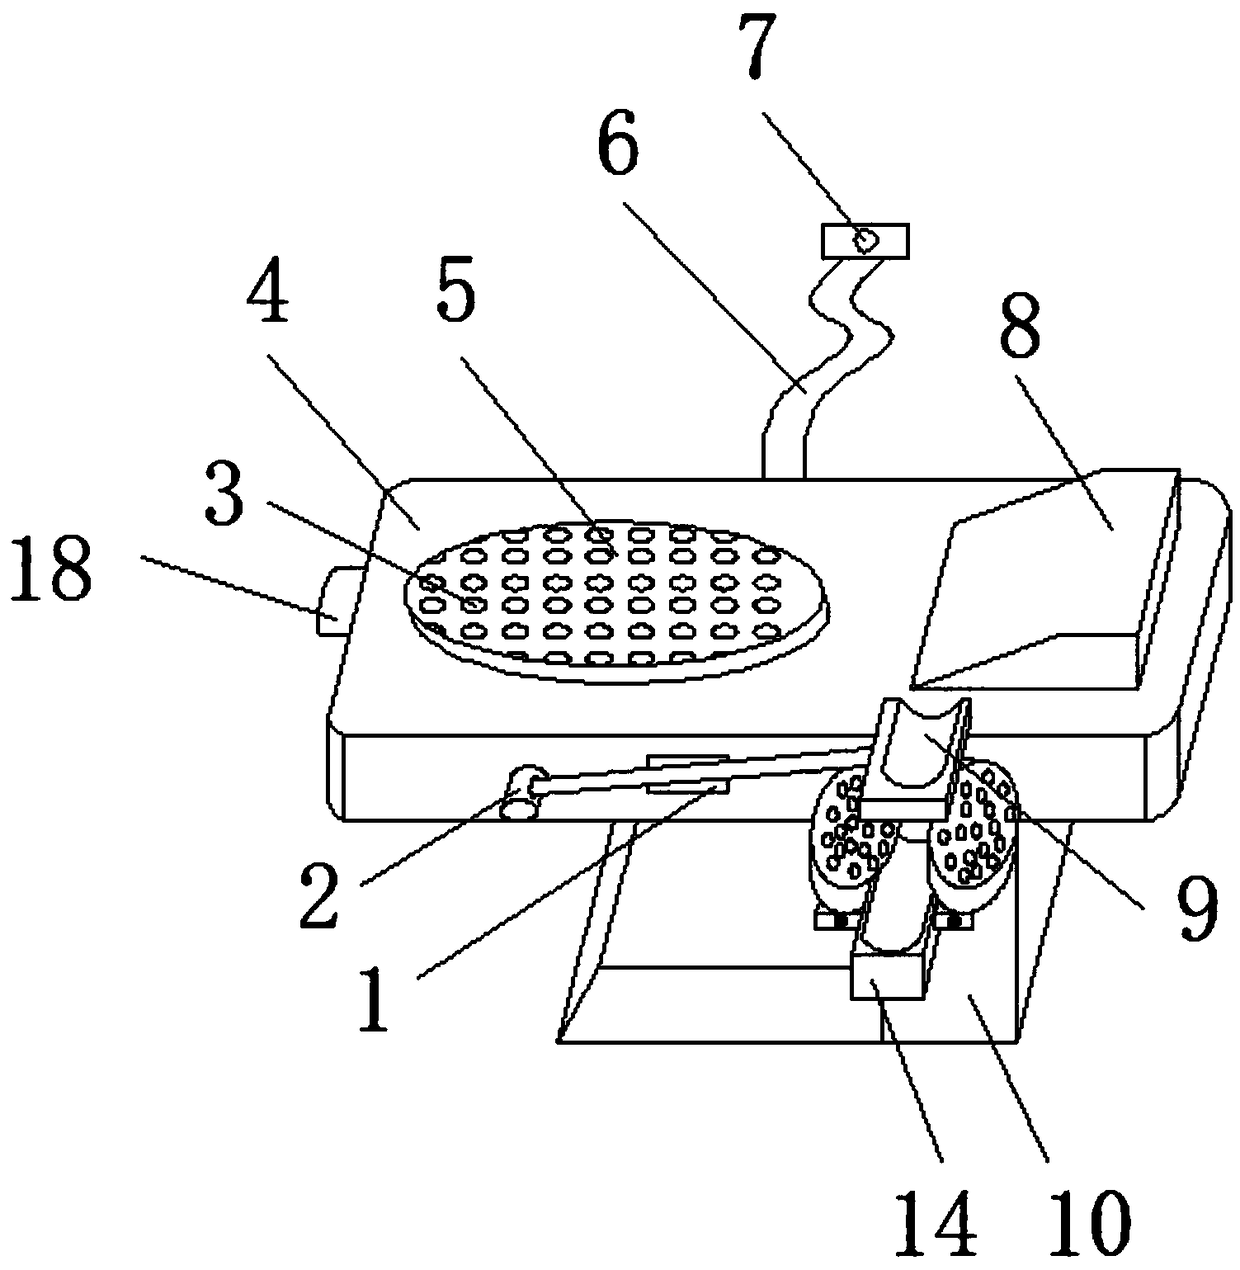 Surgical lateral-position peripheral nerve and skin injury protection device